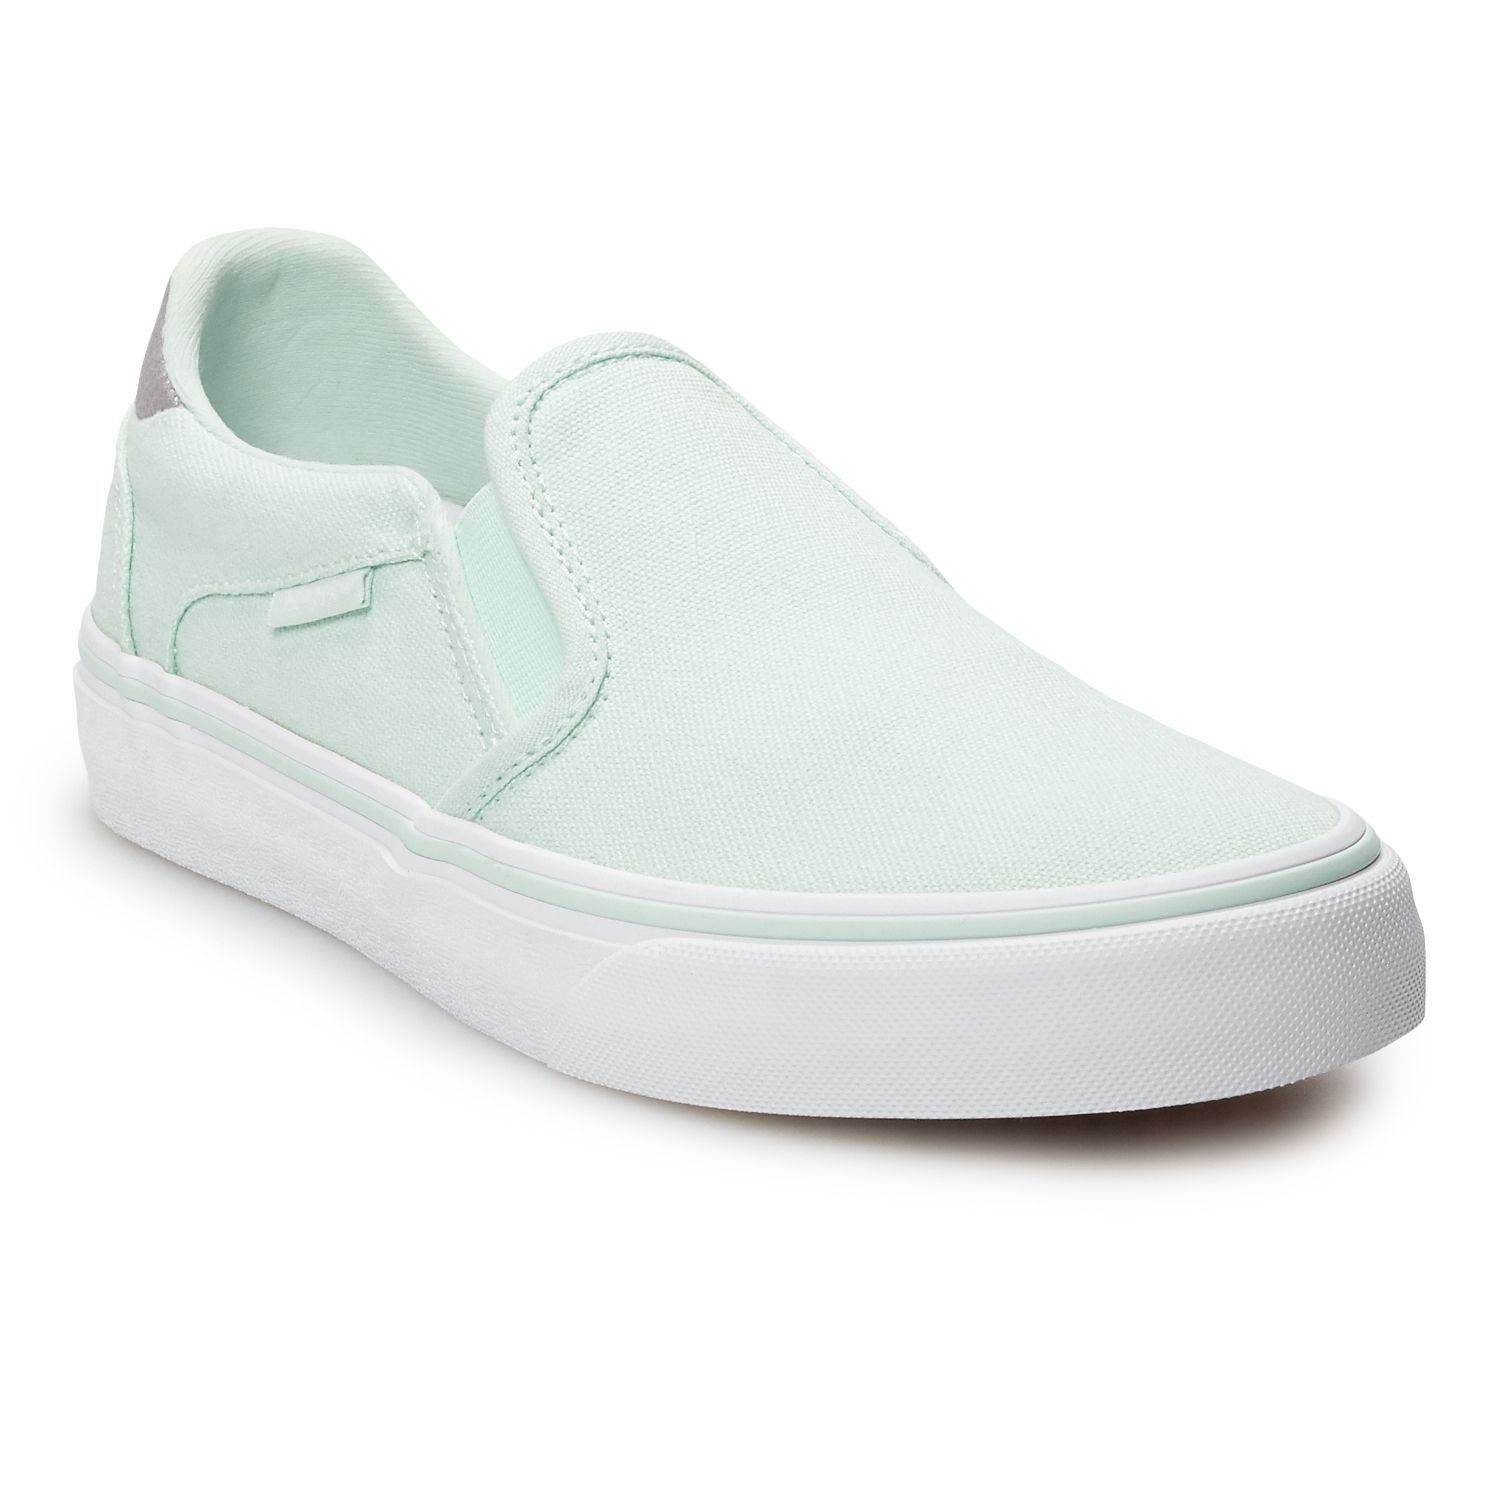 women's vans asher suede skate shoes